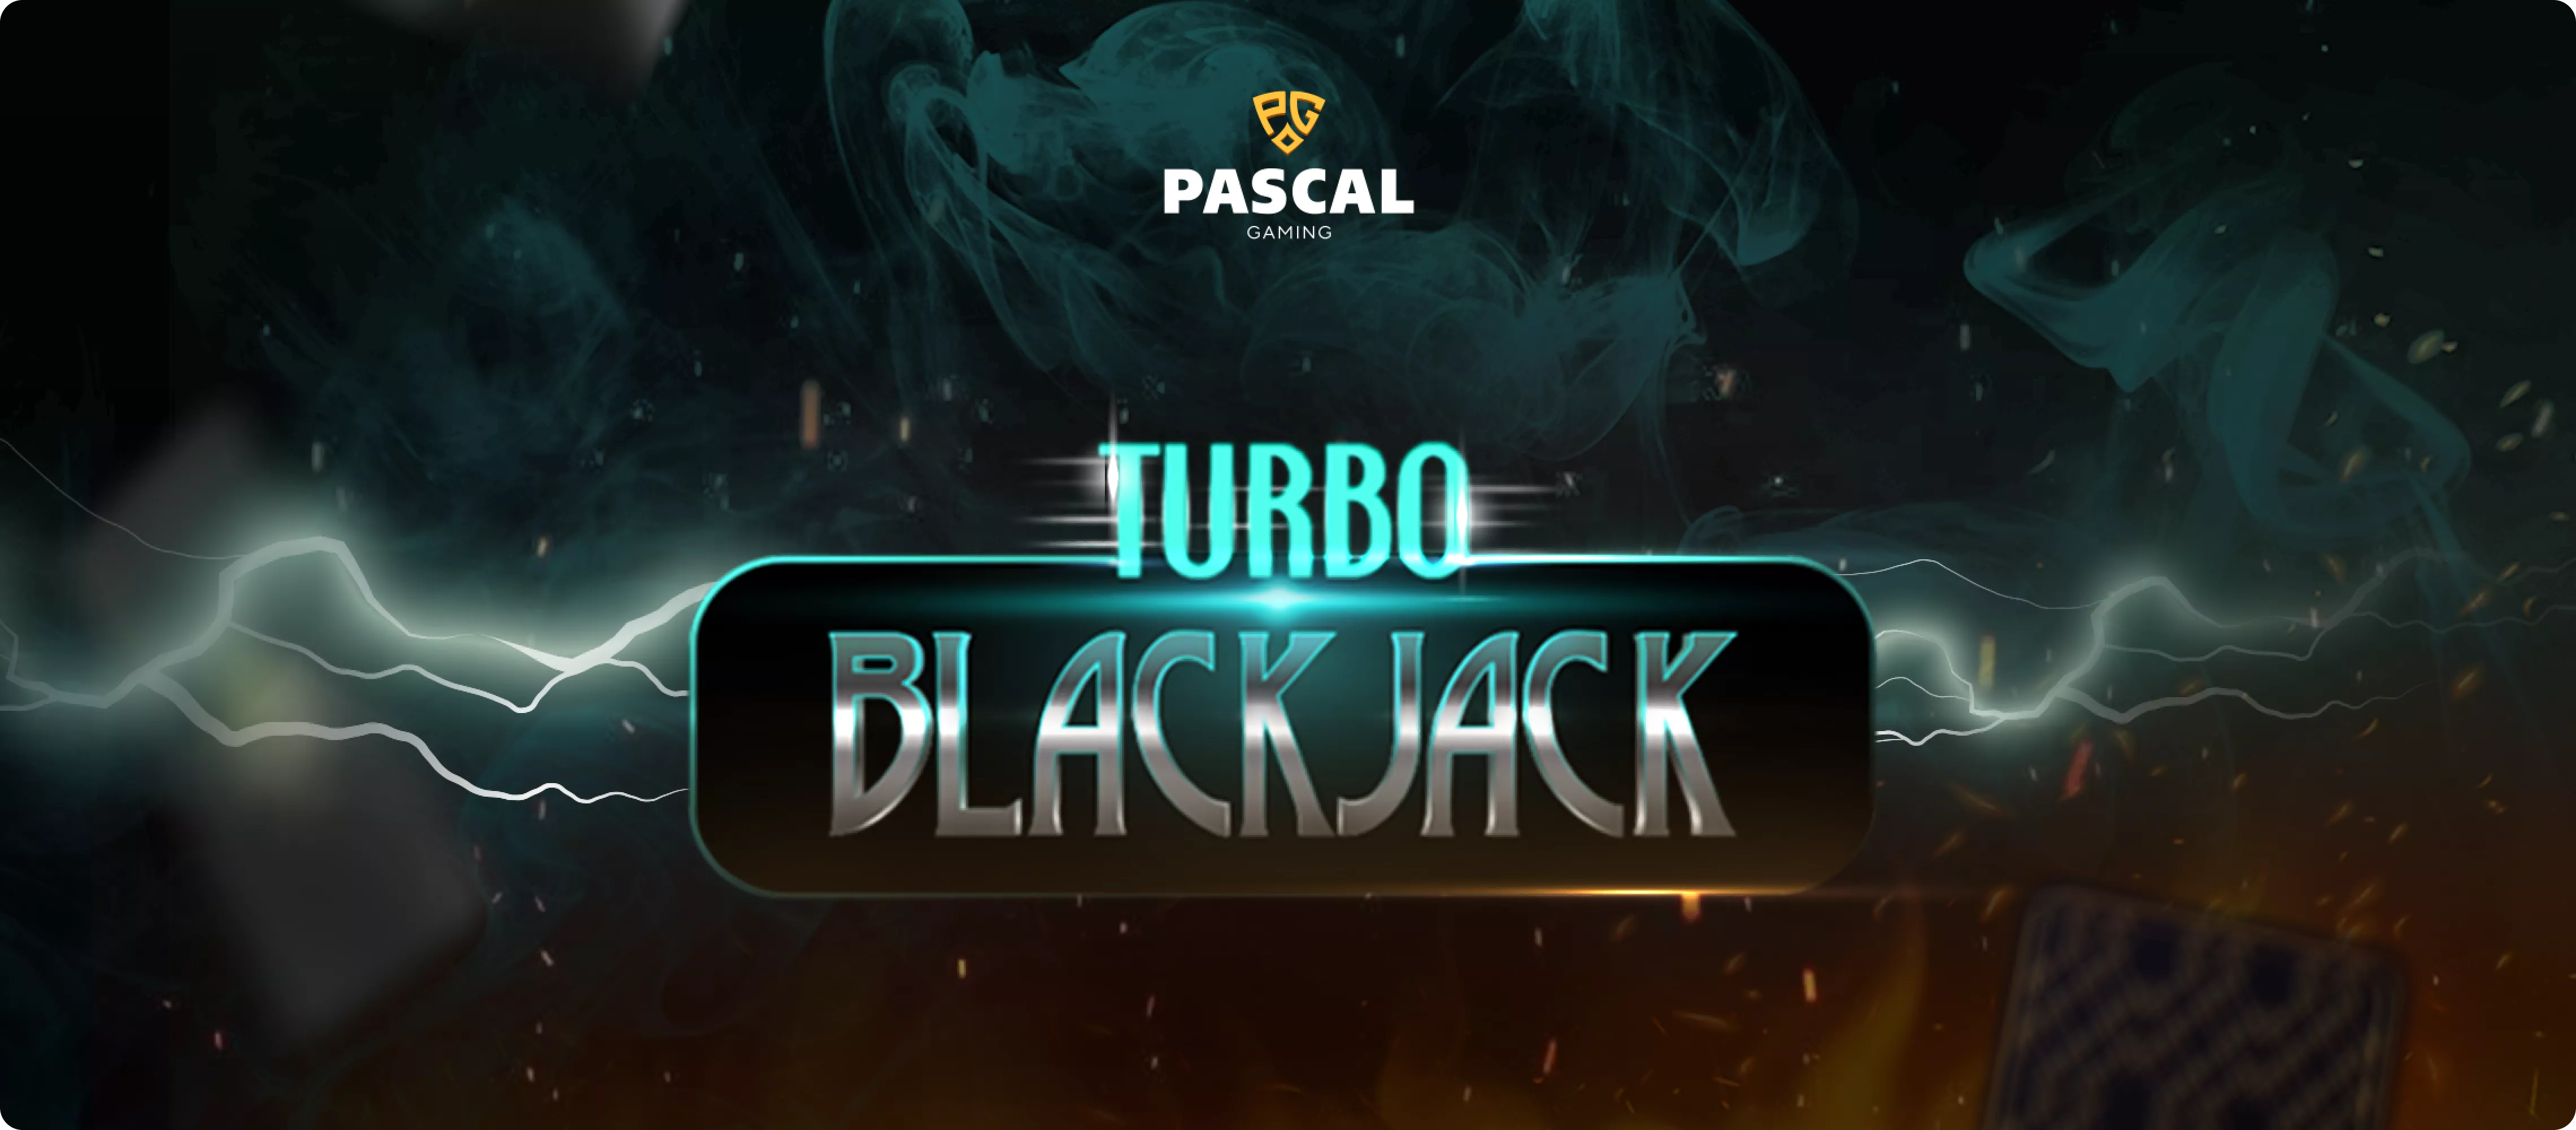 What’s New in Pascal Gaming: Meet Turbo Blackjack!